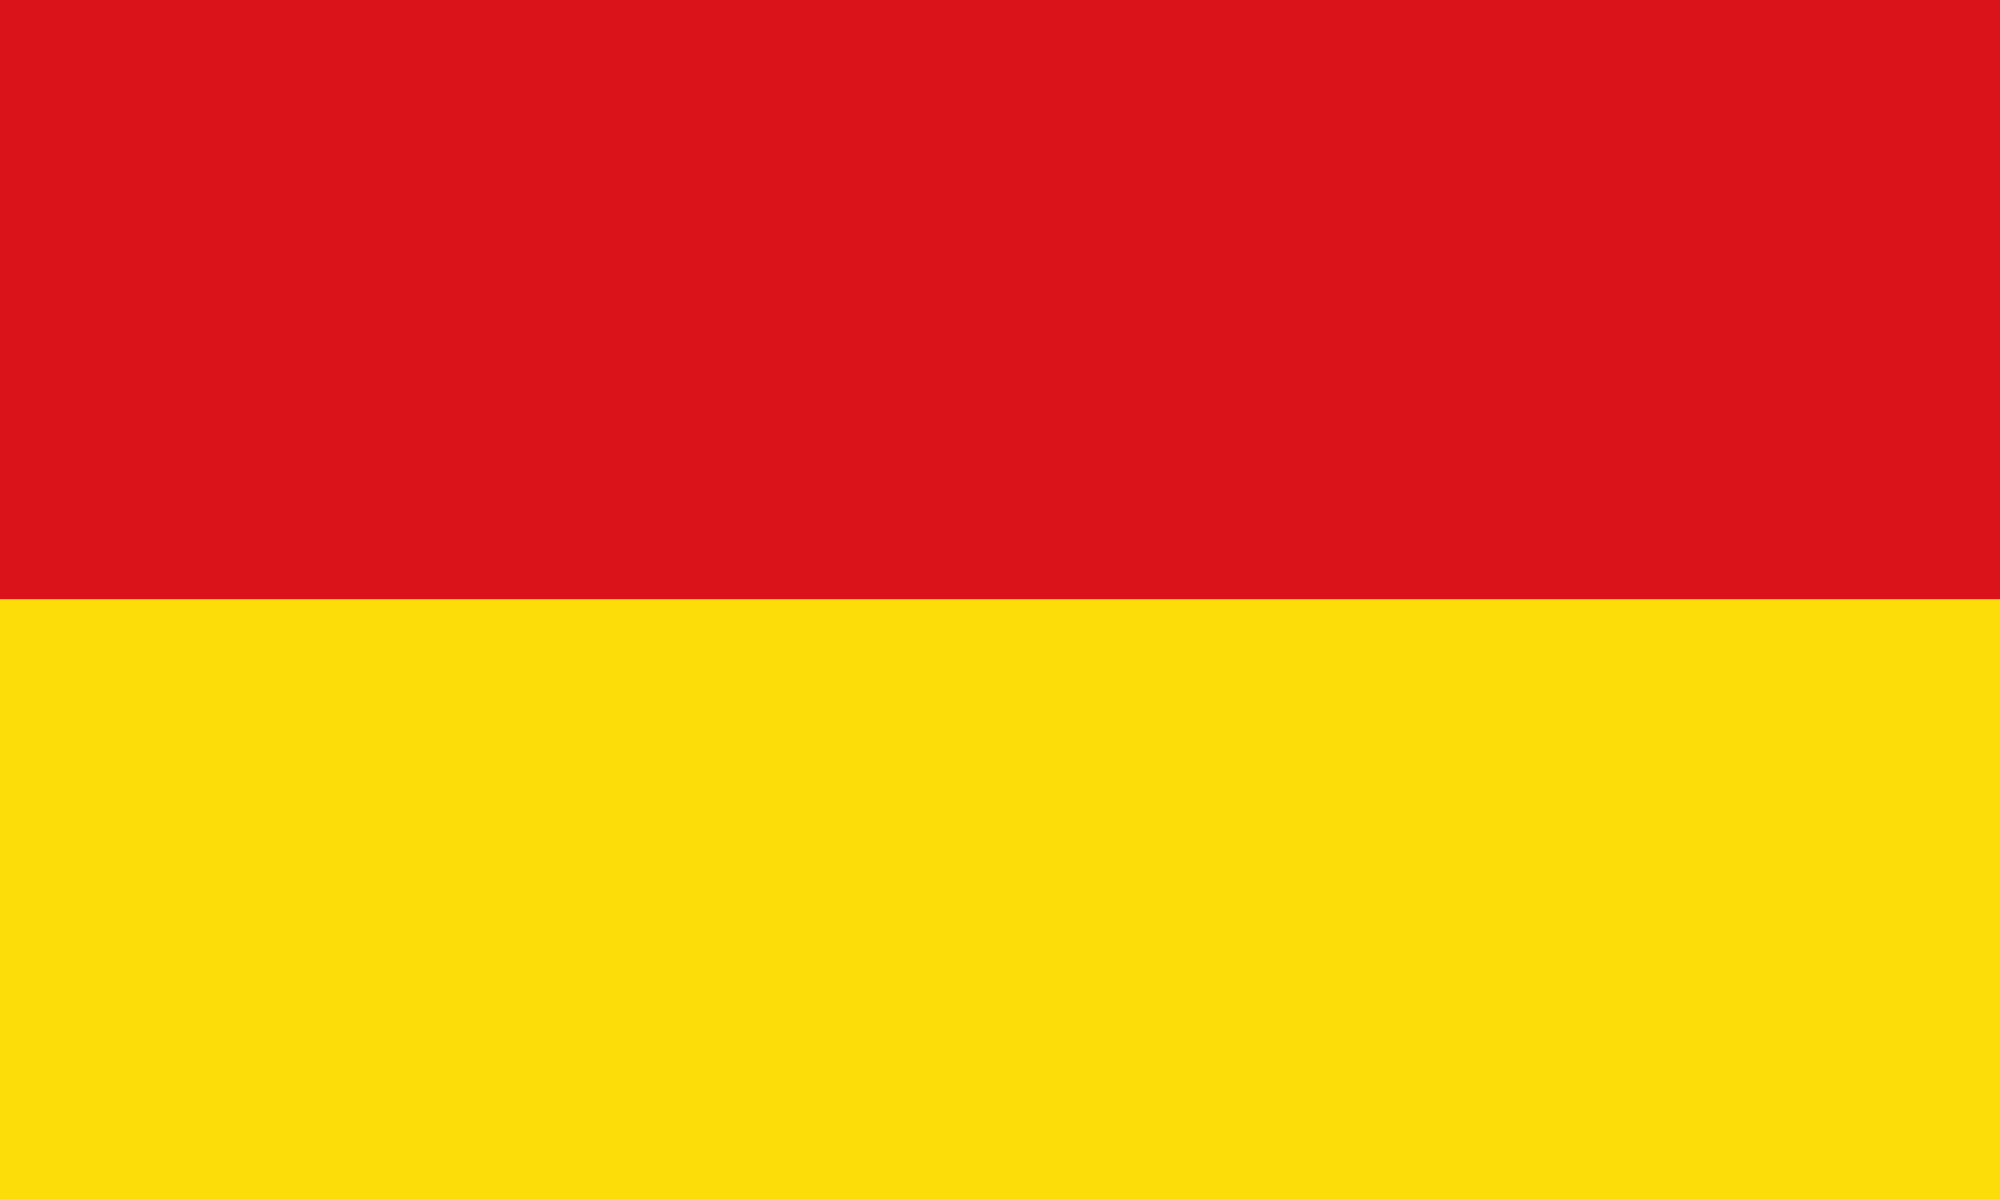 Red Yellow -Green Flag Logo - File:Flag red yellow 5x3.svg - Wikimedia Commons